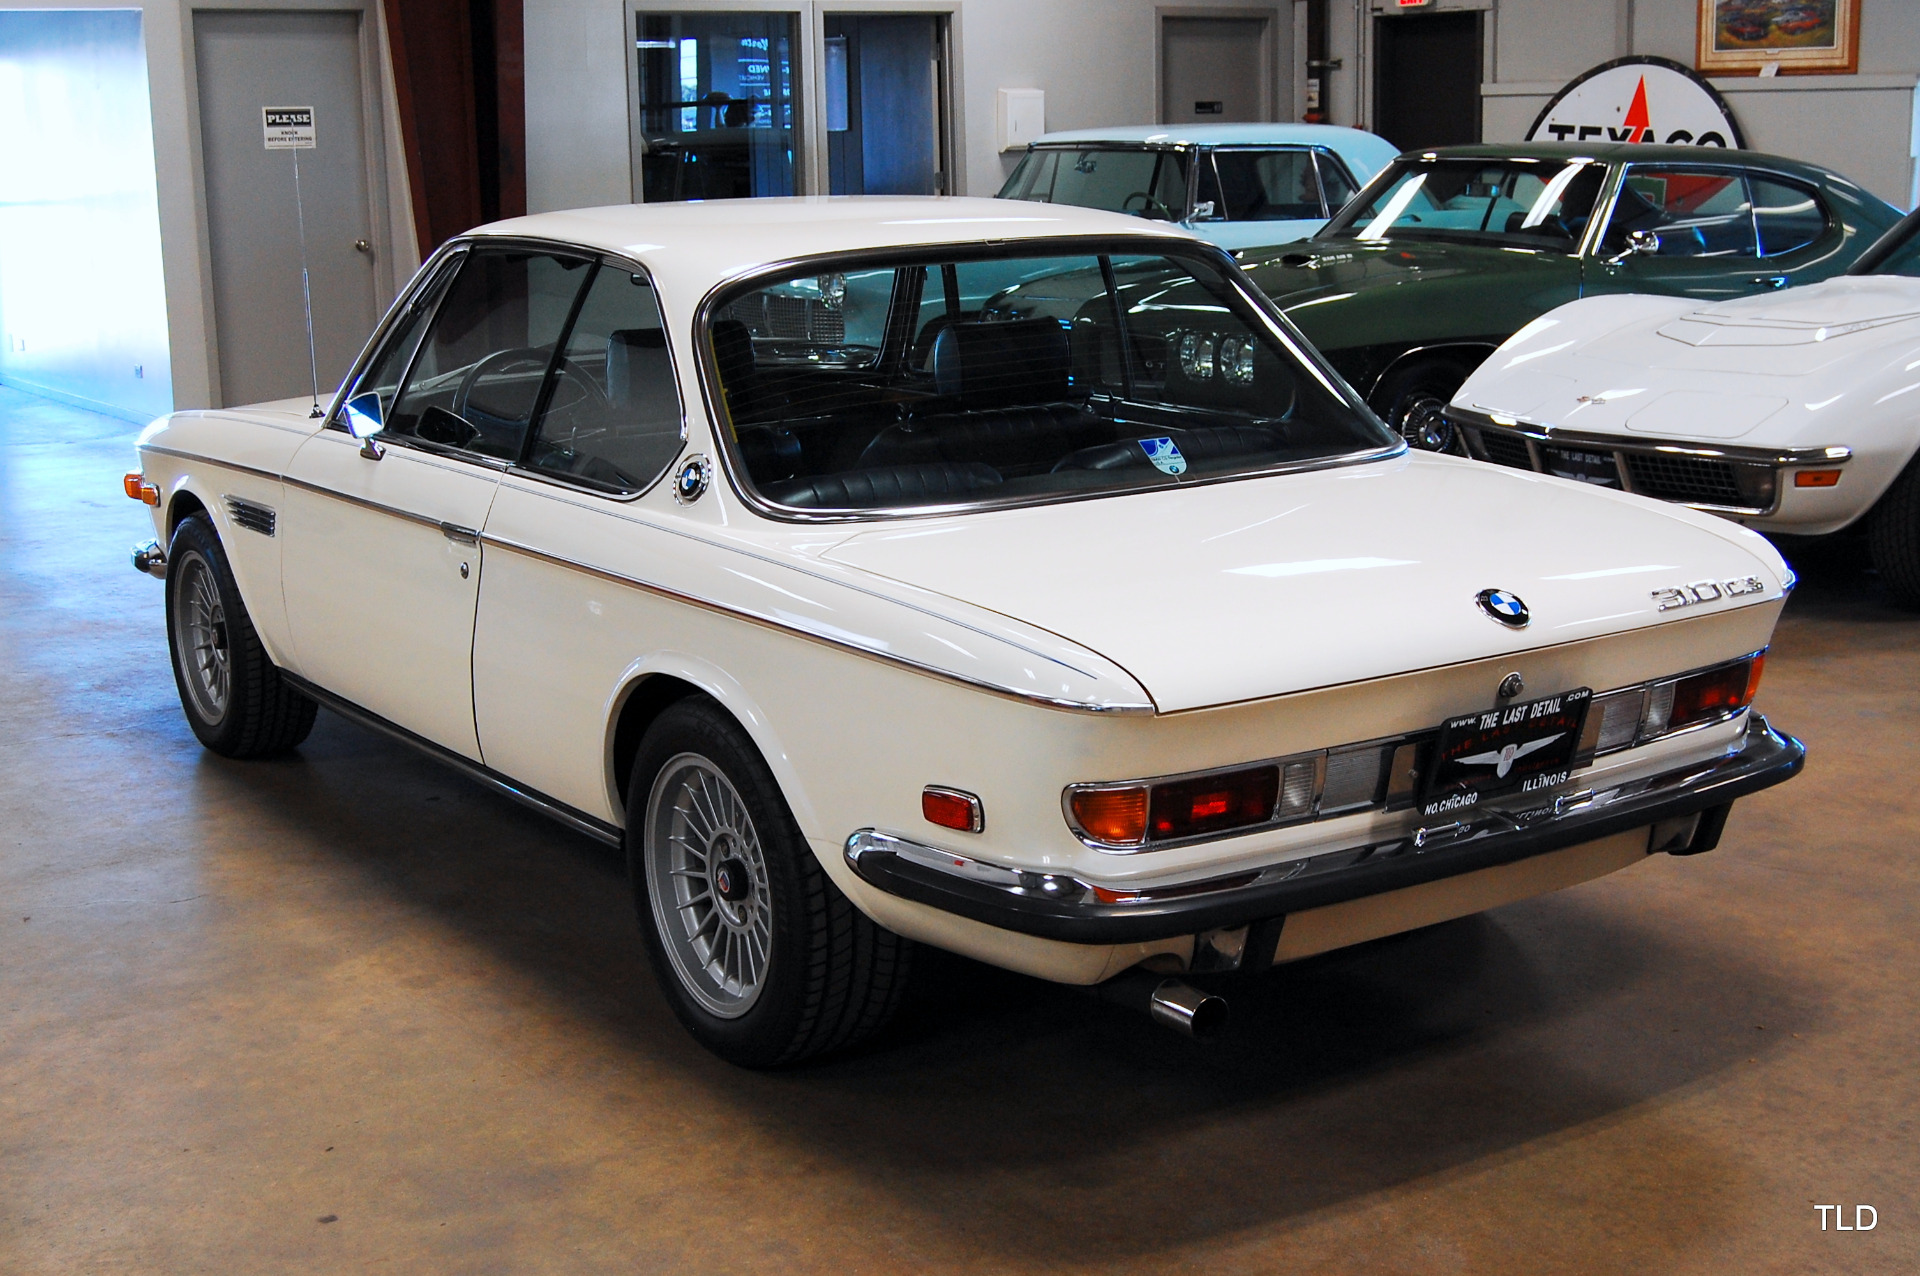 1972 BMW 3.0 CS for sale BMW 3.0 CS 1972 for sale in Local pickup only